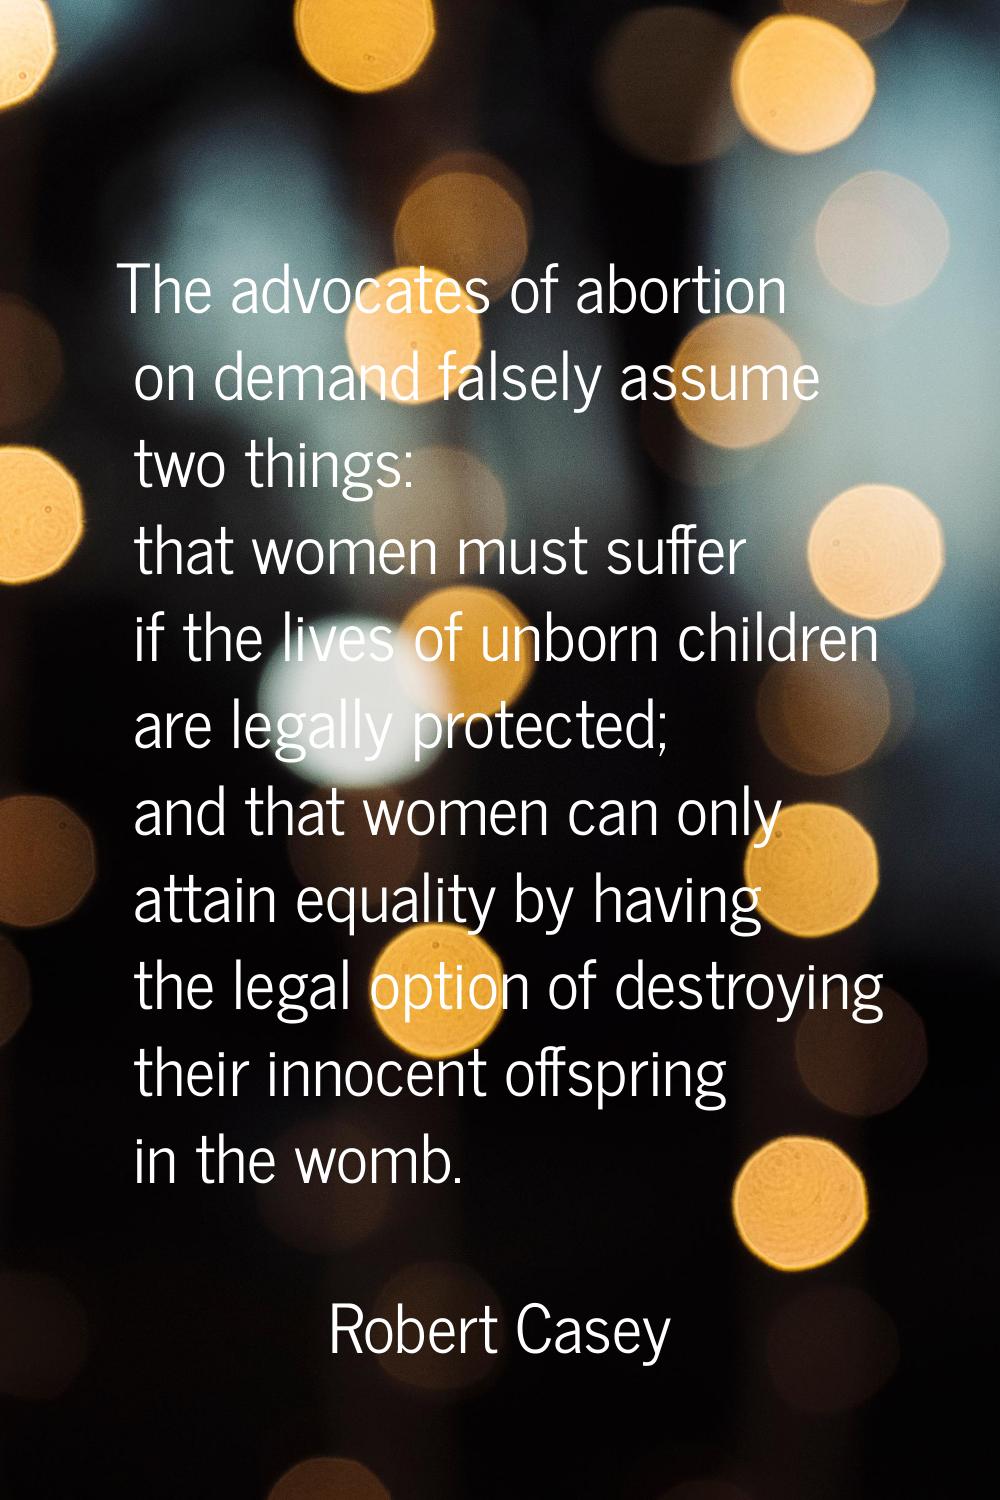 The advocates of abortion on demand falsely assume two things: that women must suffer if the lives 